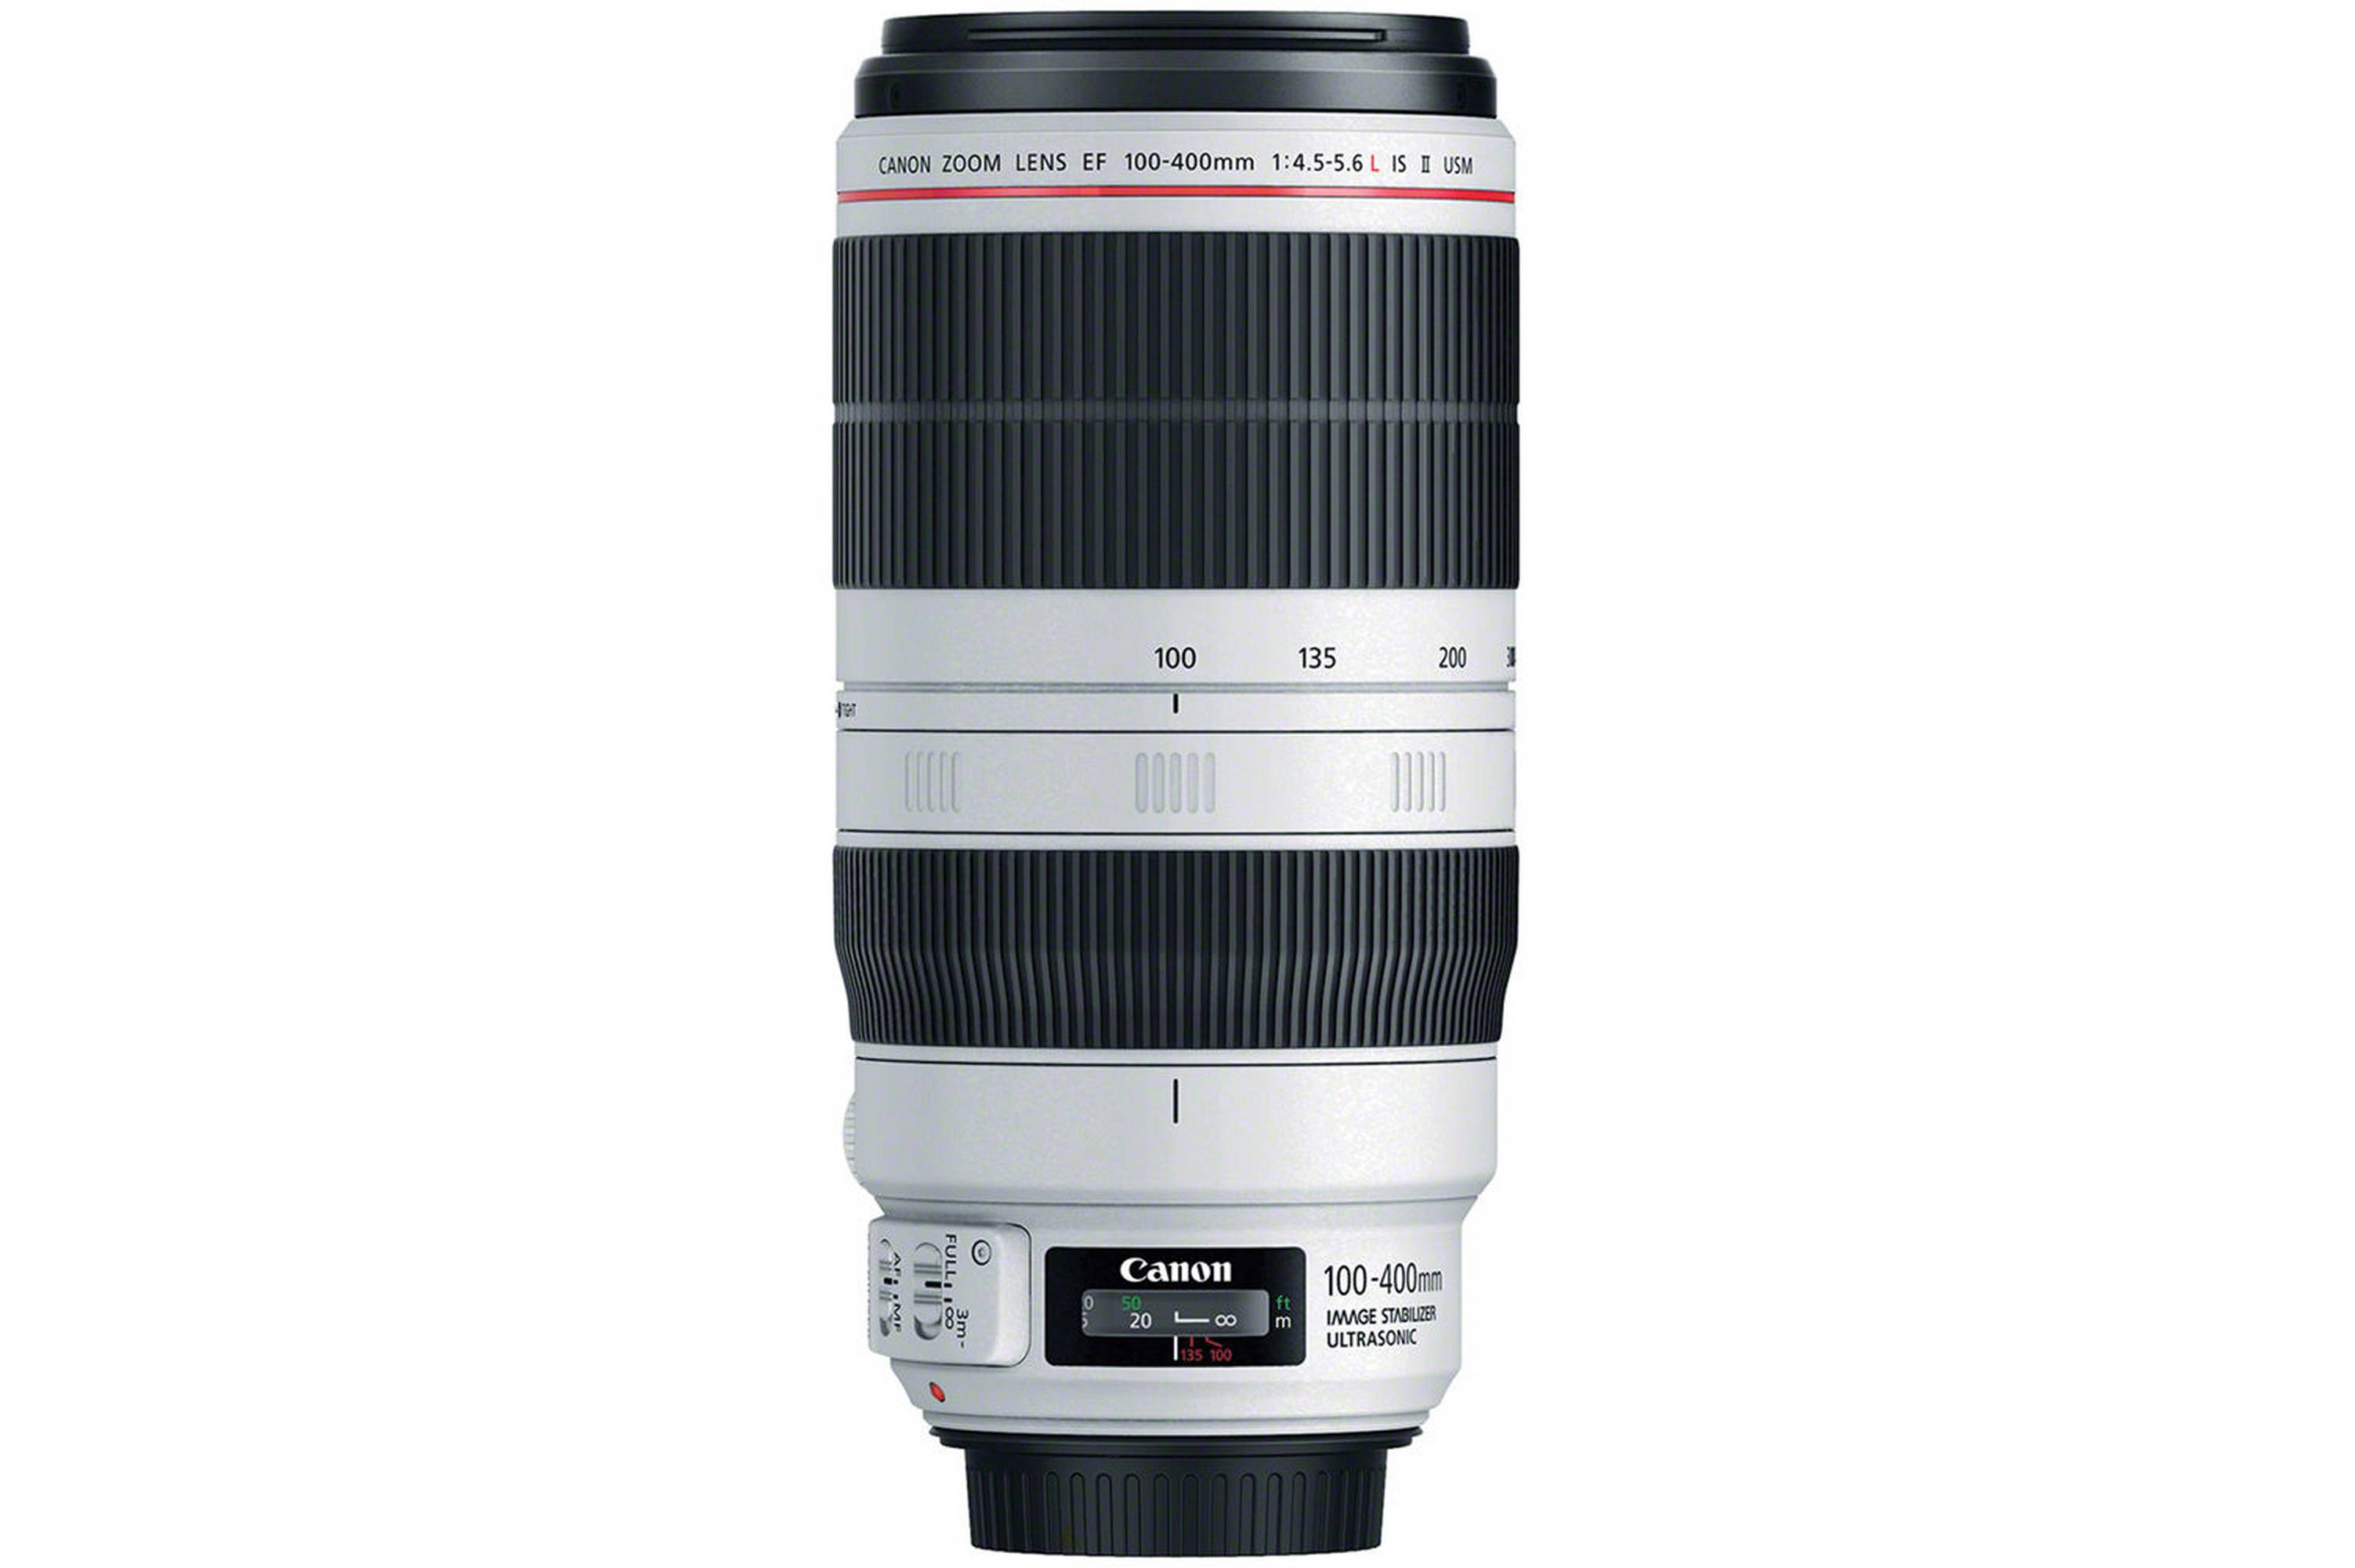 Canon Zoom Lens EF 100-400mm 1:4.5-5.6L IS II USM Canon Zoom Lens EF 100-400mm 1:4.5-5.6L IS II USM